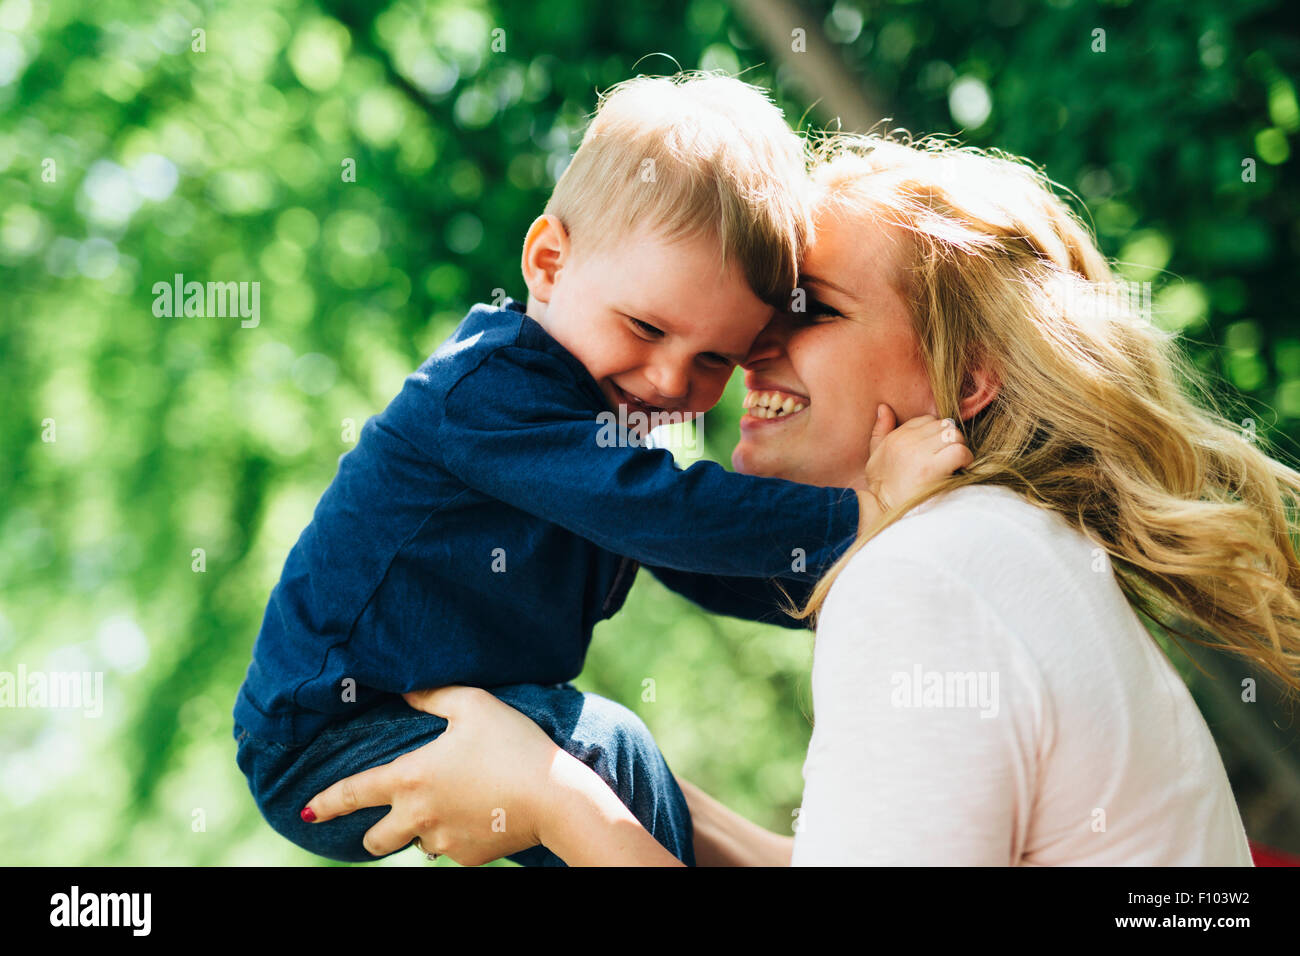 Mother smiling laughing and playing with her child outdoors on a nice summer day Stock Photo